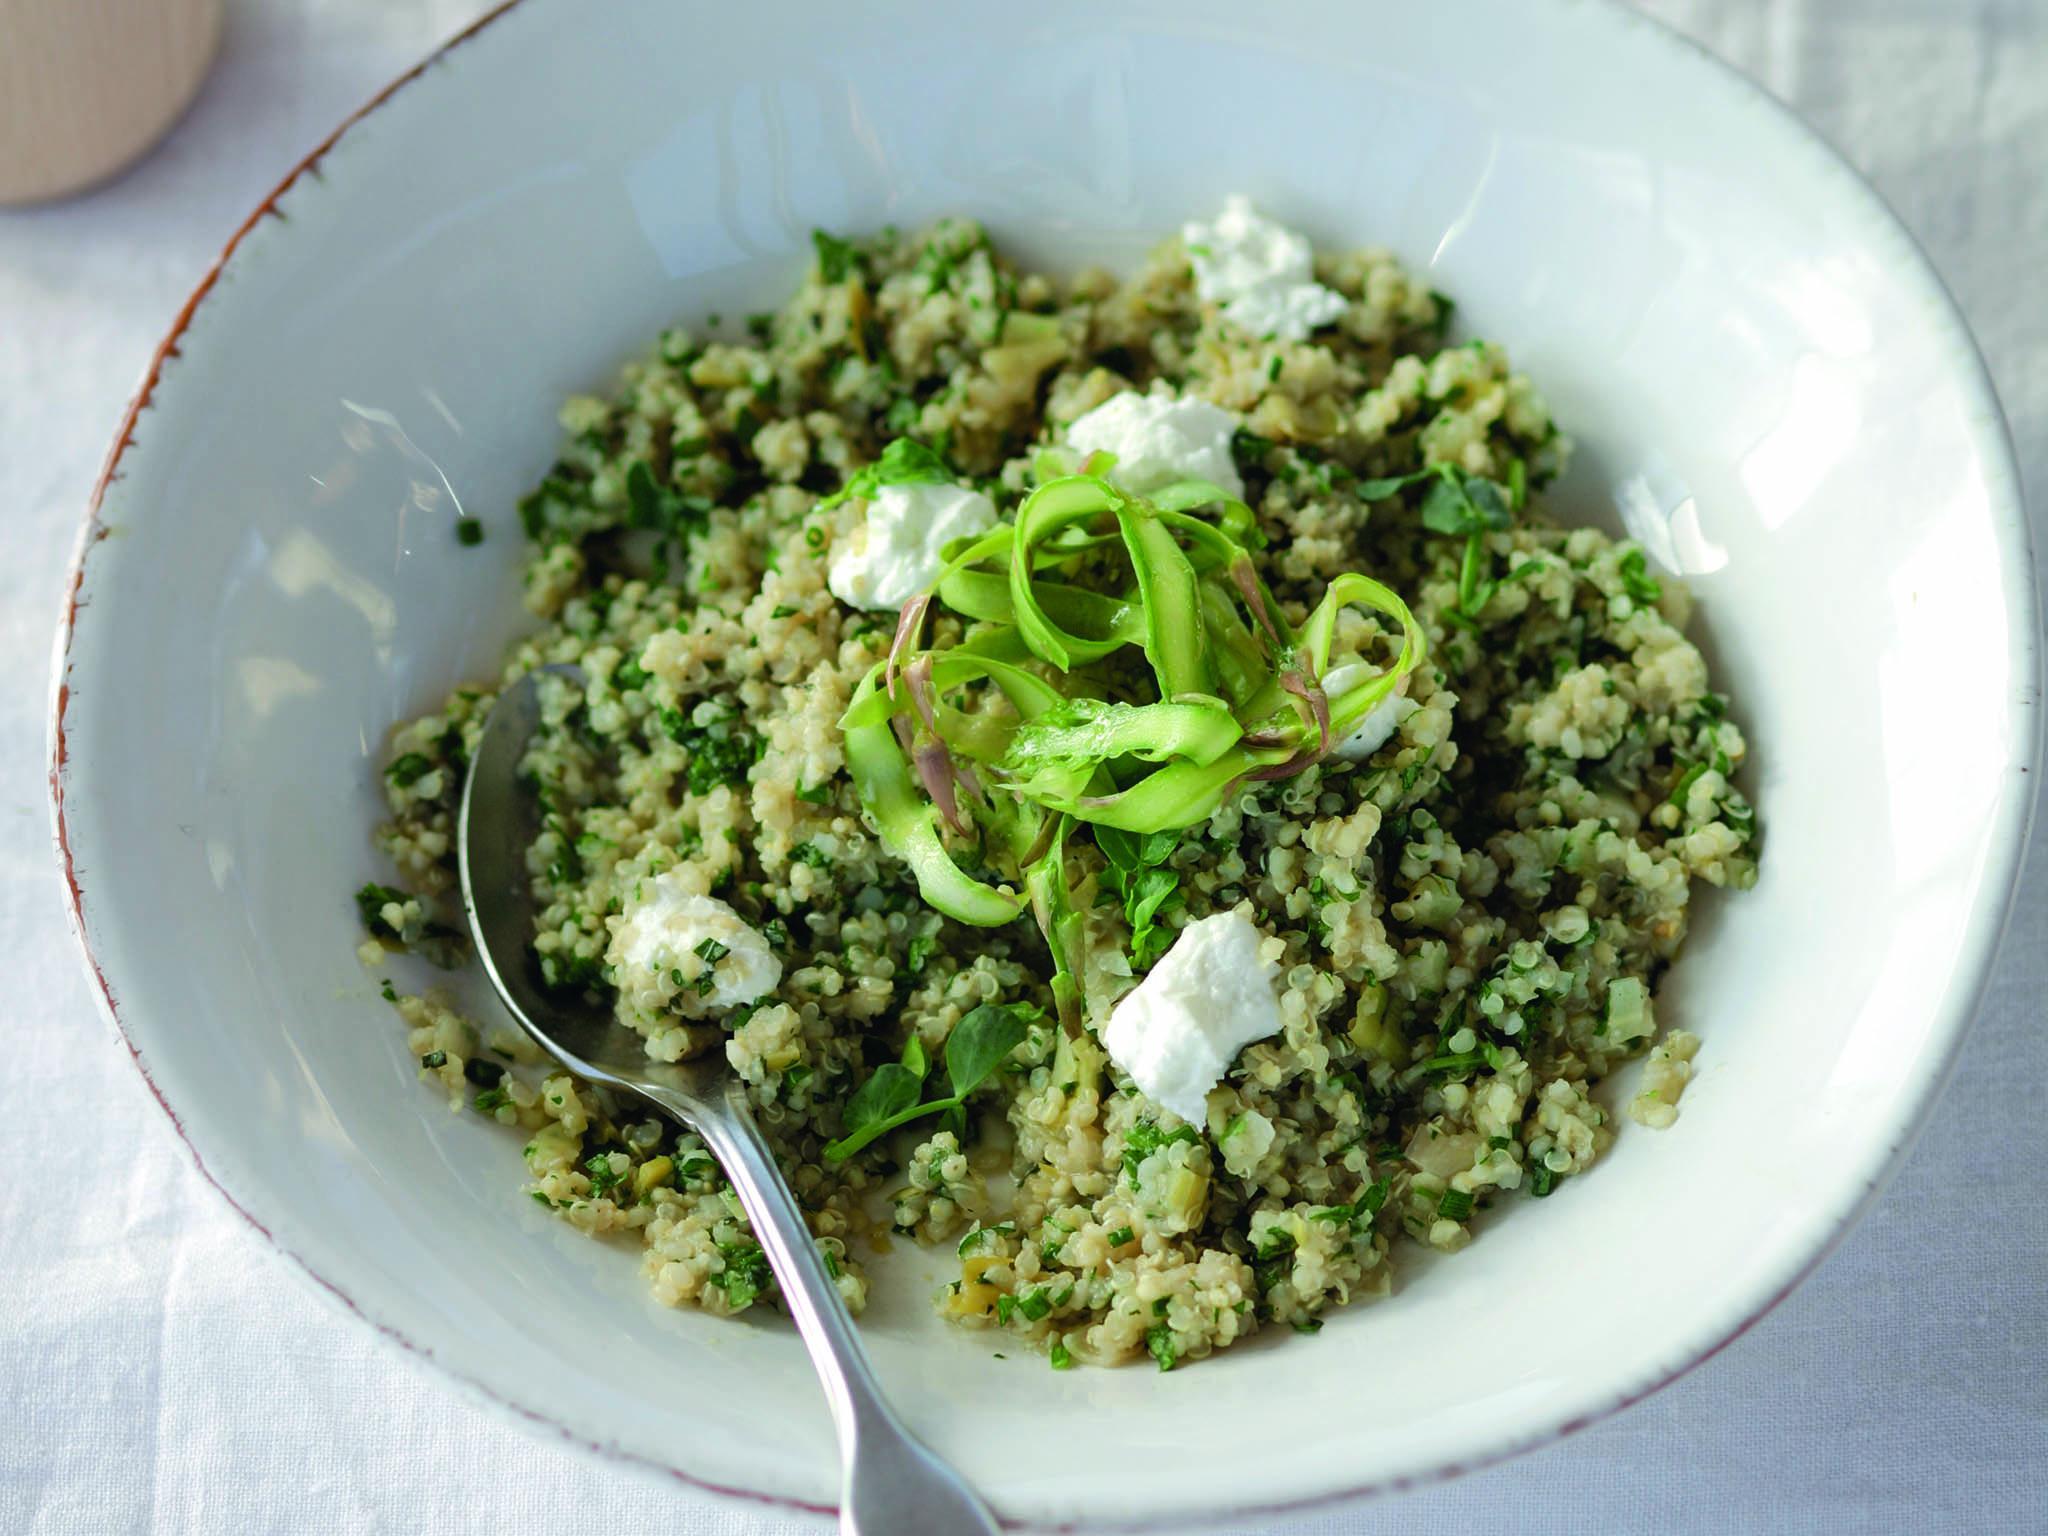 Look forward to sunnier days with this fresh, zingy dish